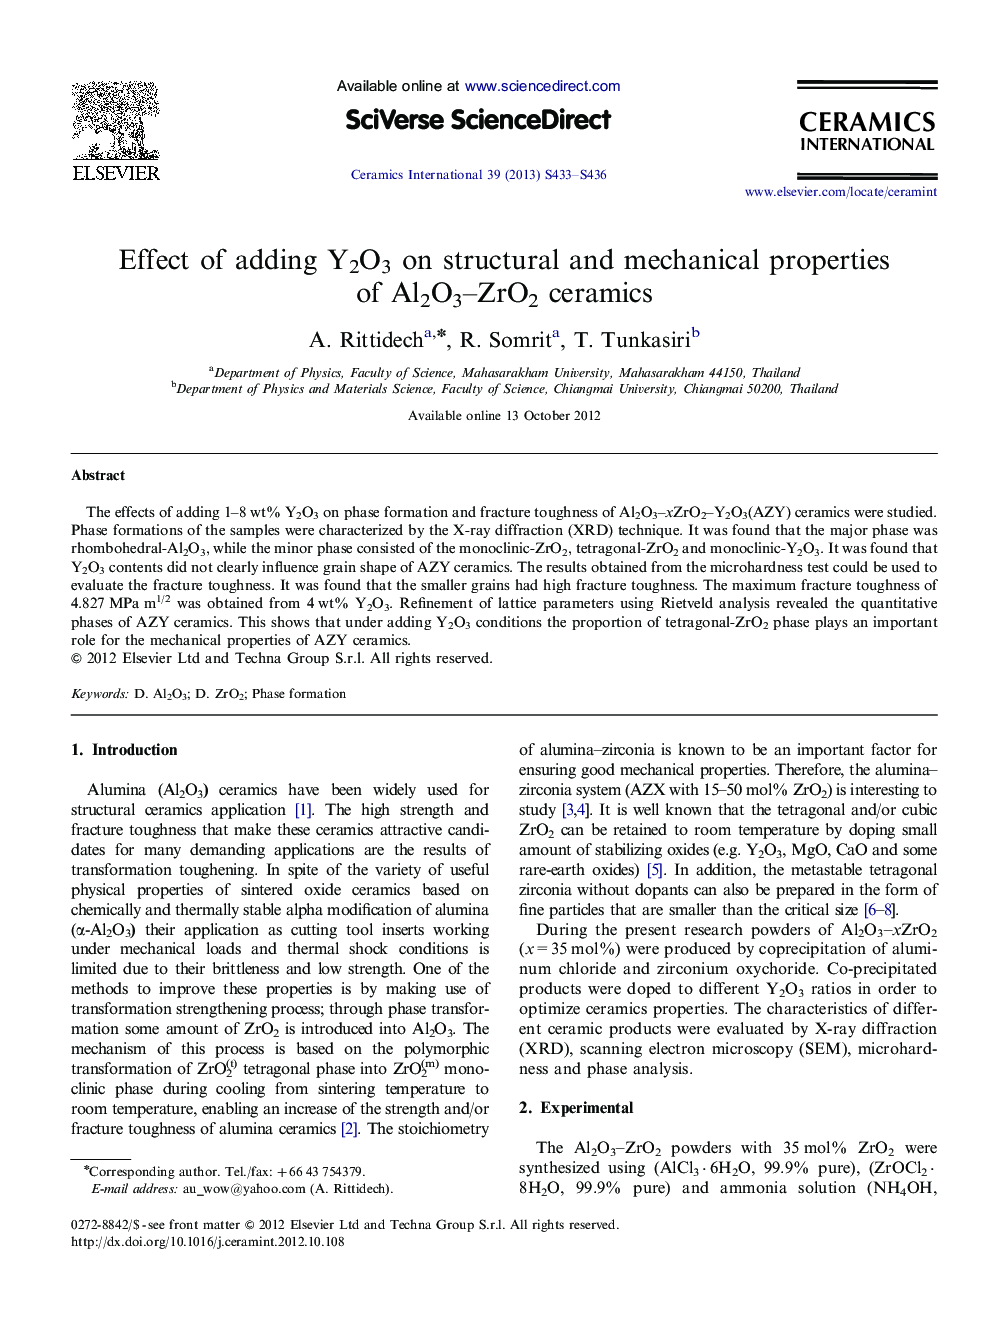 Effect of adding Y2O3 on structural and mechanical properties of Al2O3–ZrO2 ceramics